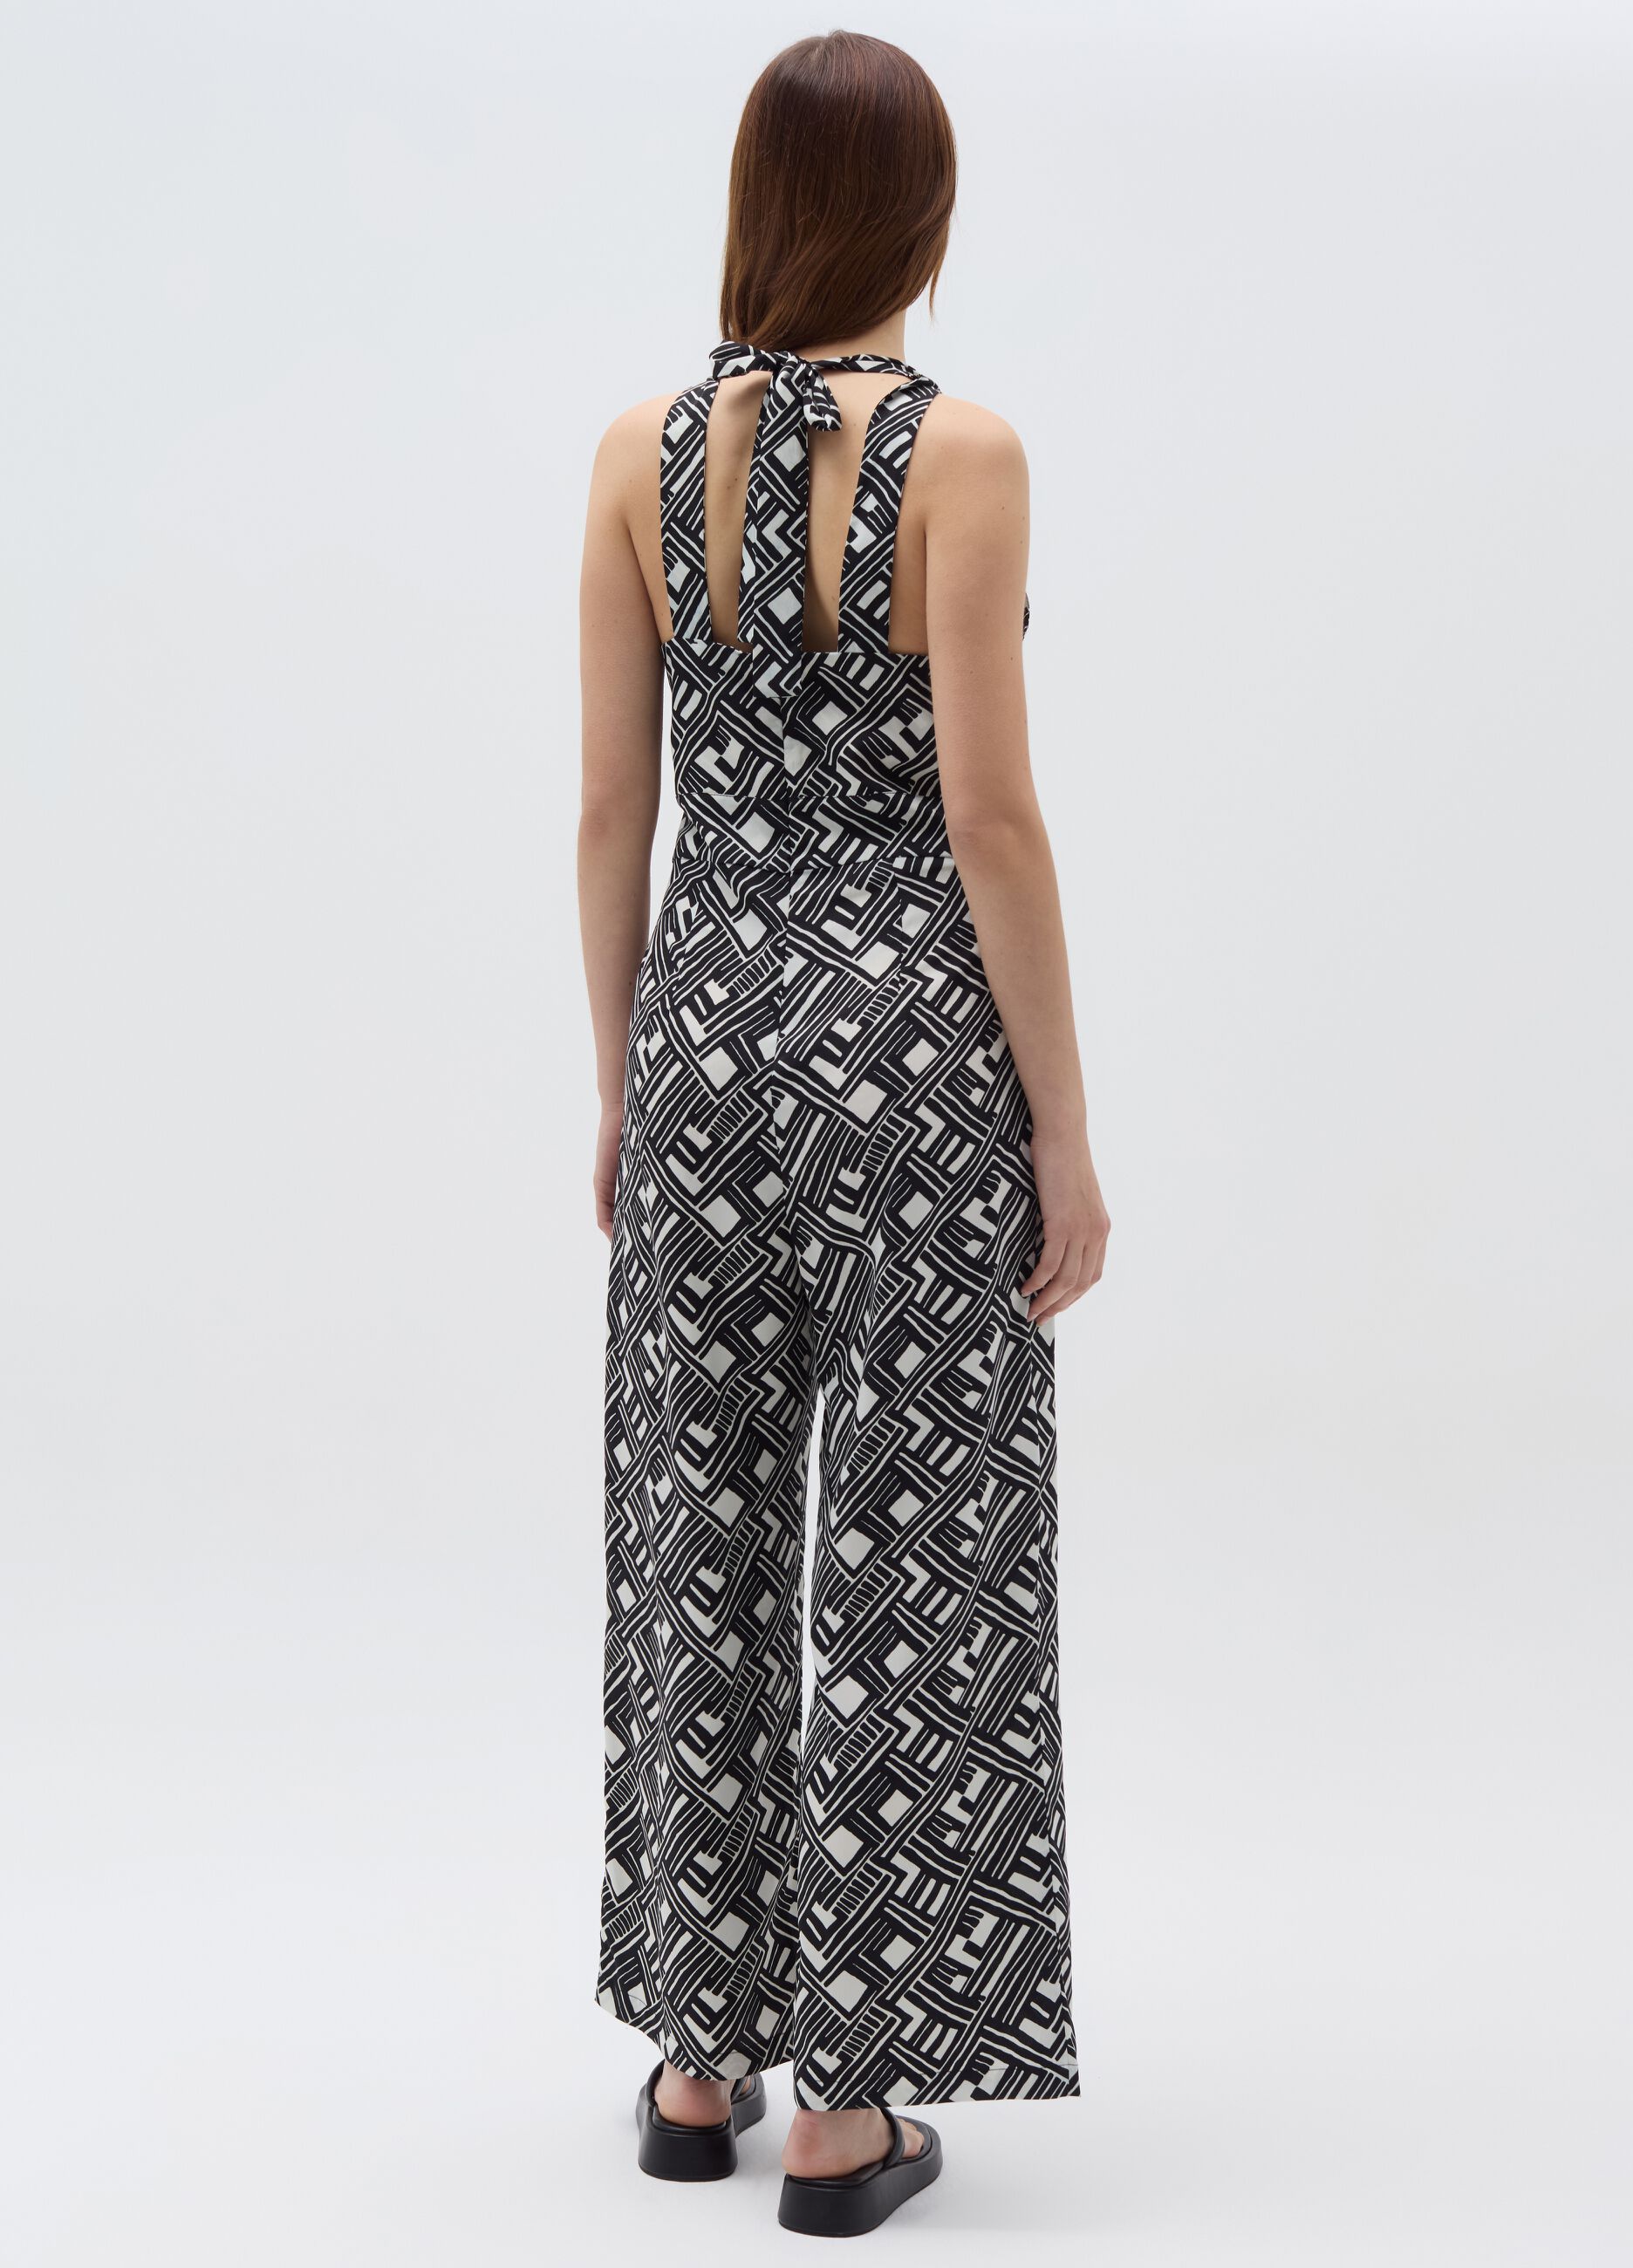 Jumpsuit with geometric pattern